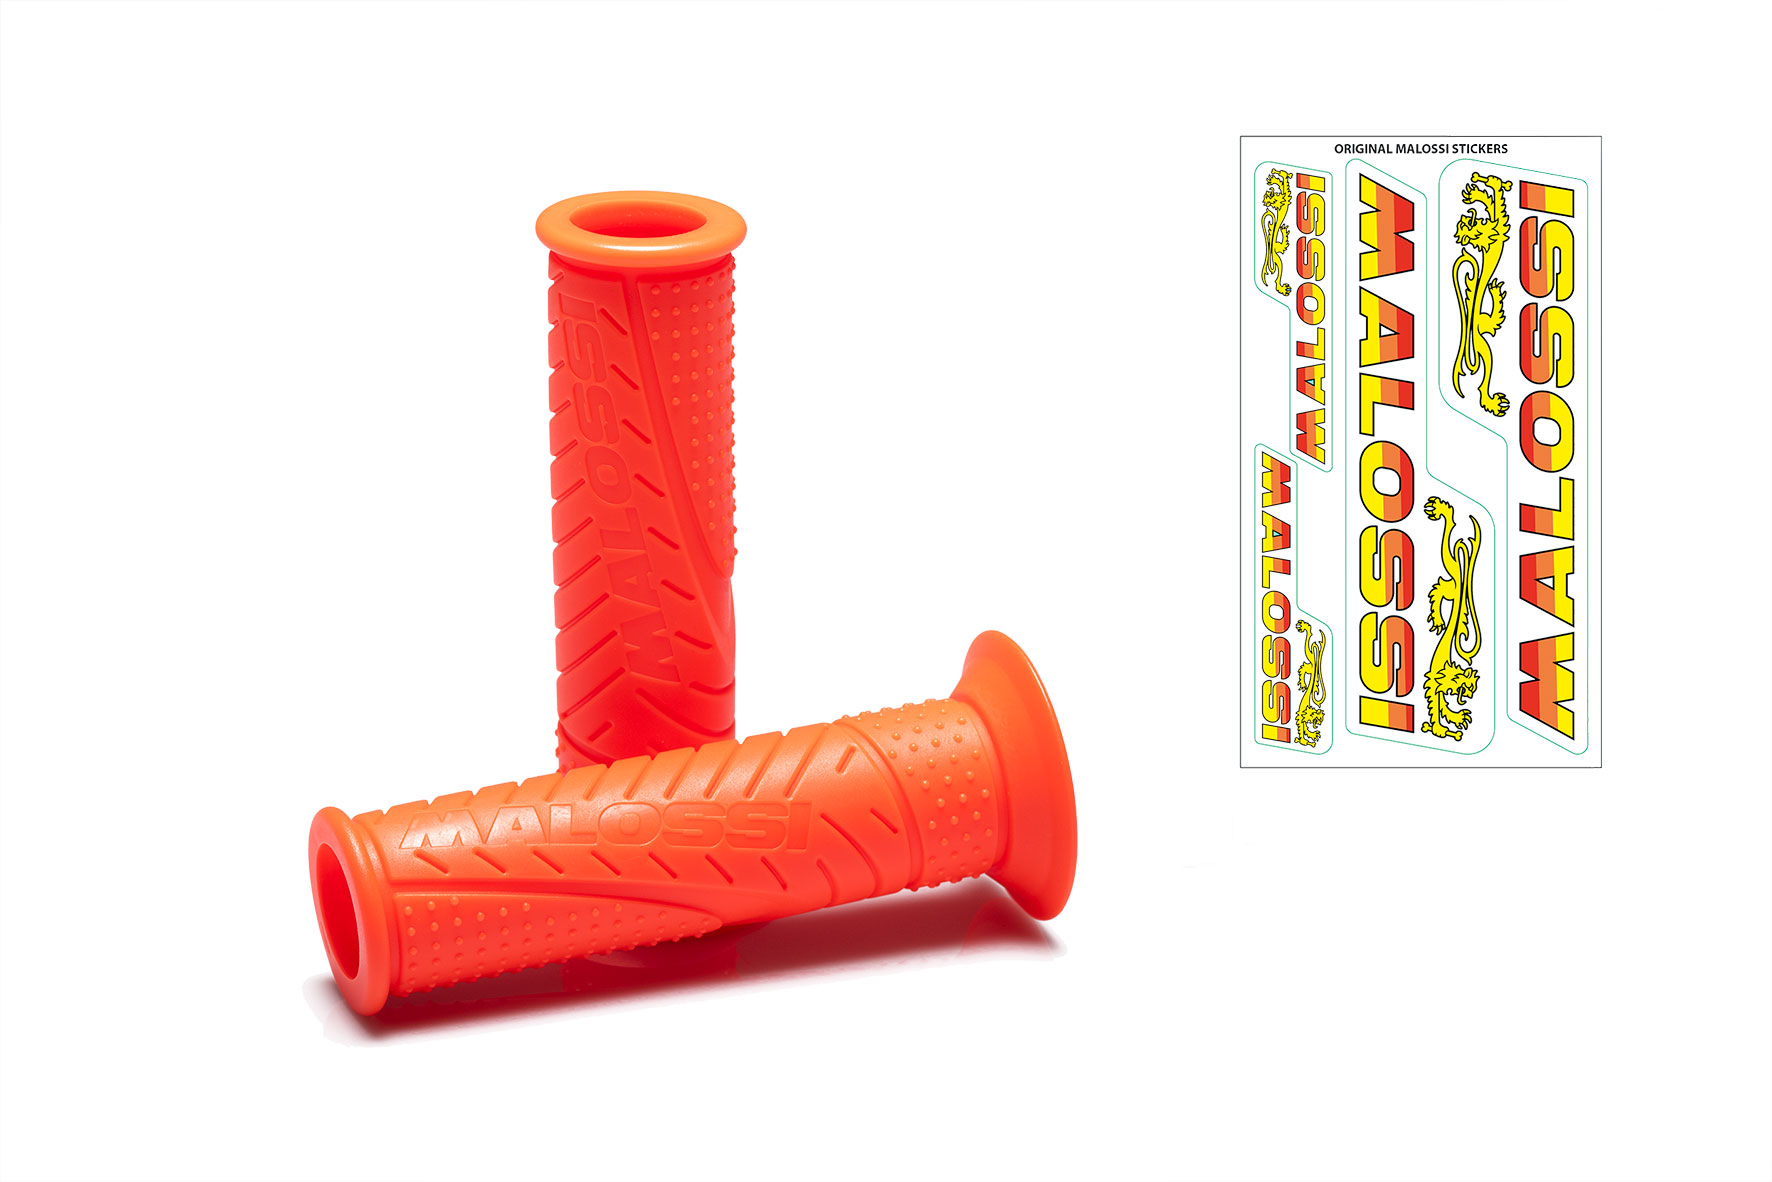 2 MALOSSI MHR FLUO ORANGE GRIPS (mod. without side fastening)